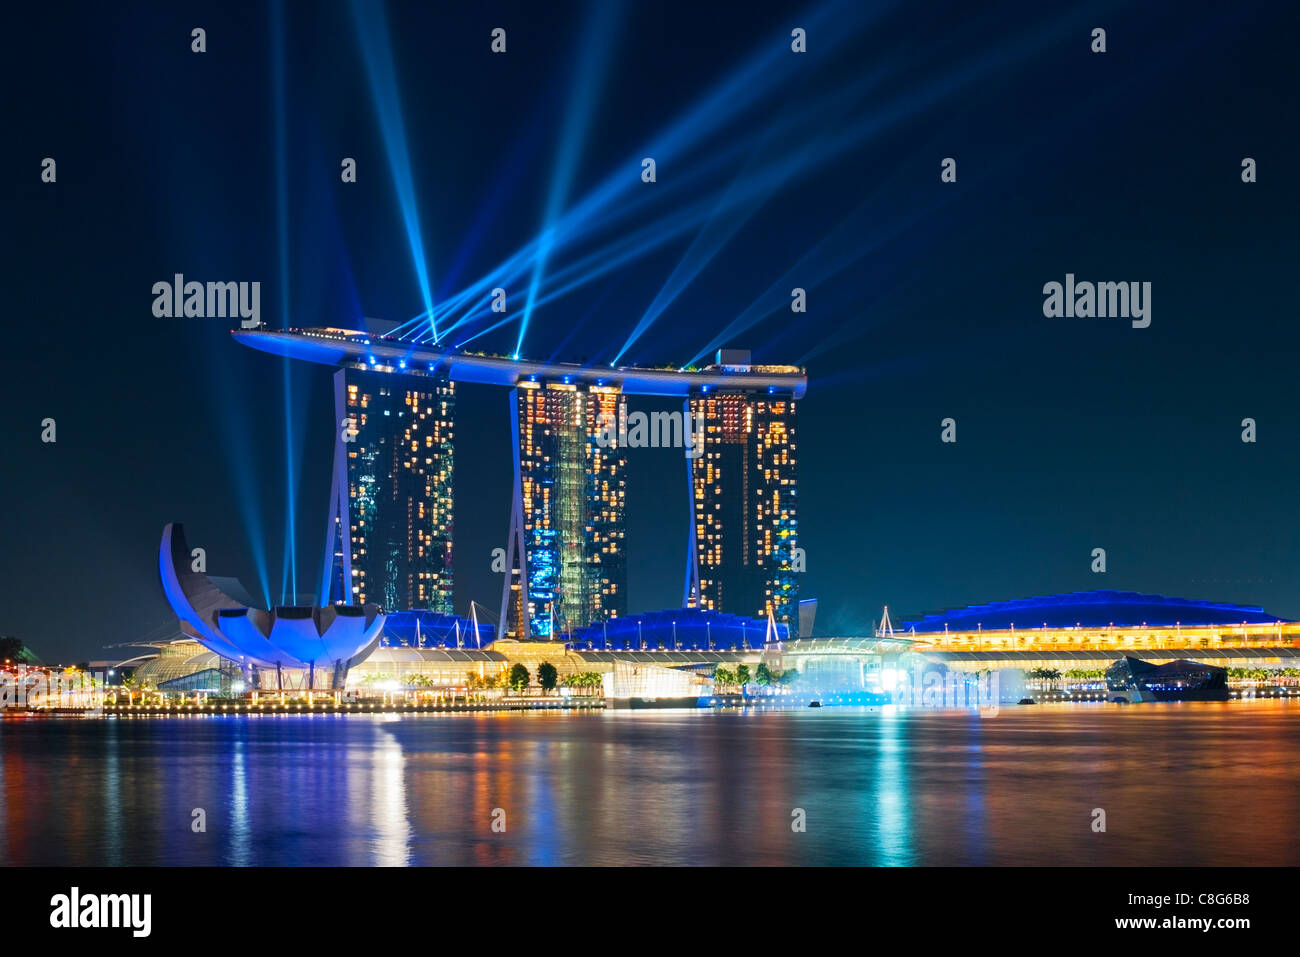 Nightly light and water show, 'Wonder Full', with lasers at the Marina Bay Sands Hotel, Singapore Stock Photo